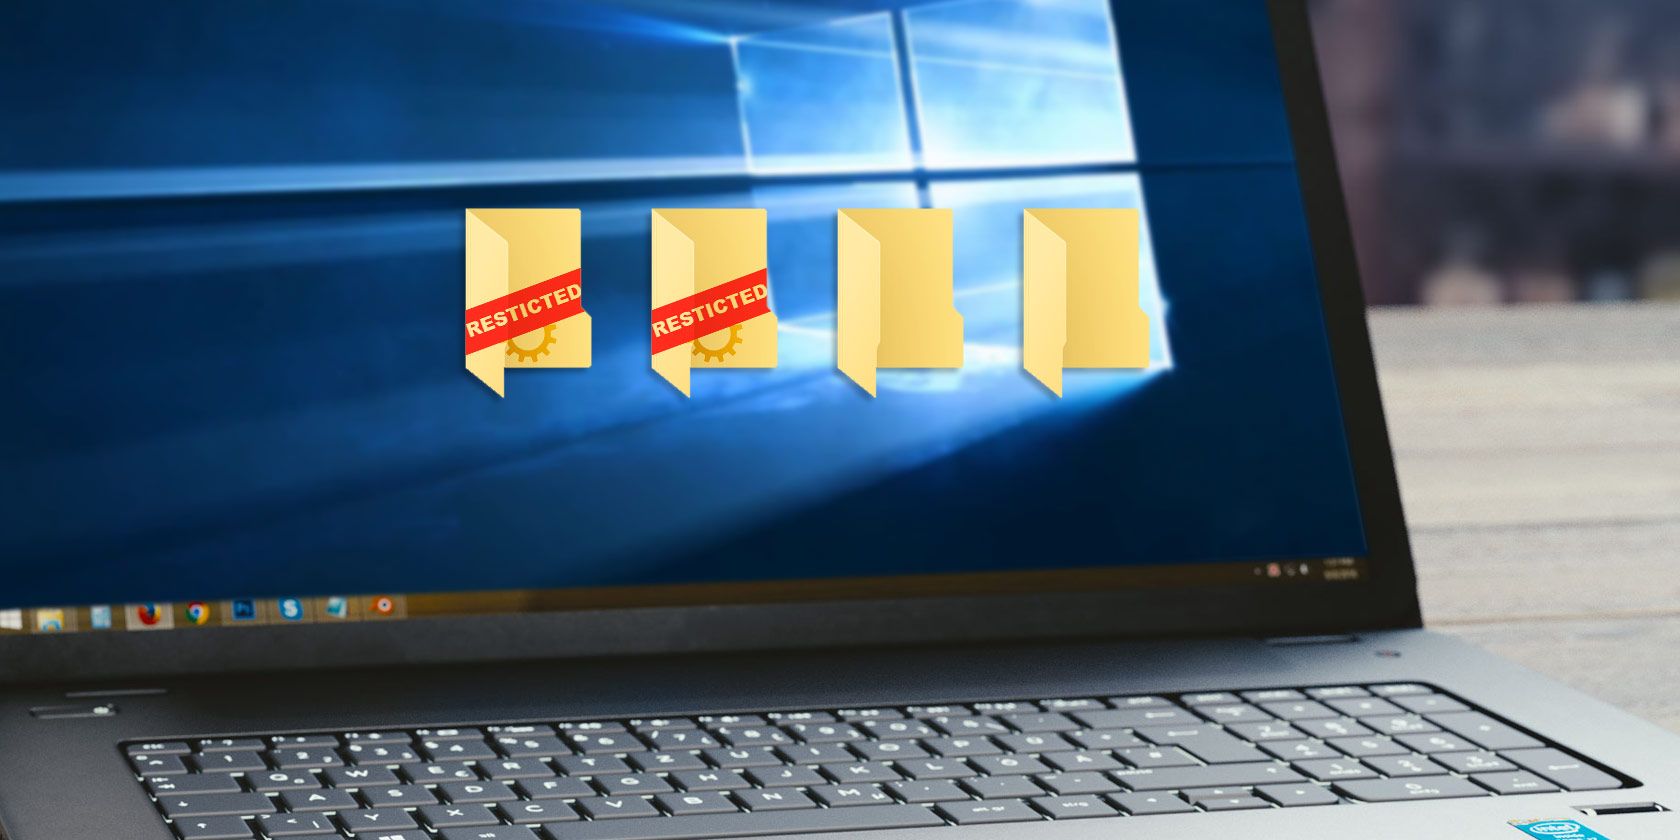 6 Default Windows Files and Folders You Should Never Touch